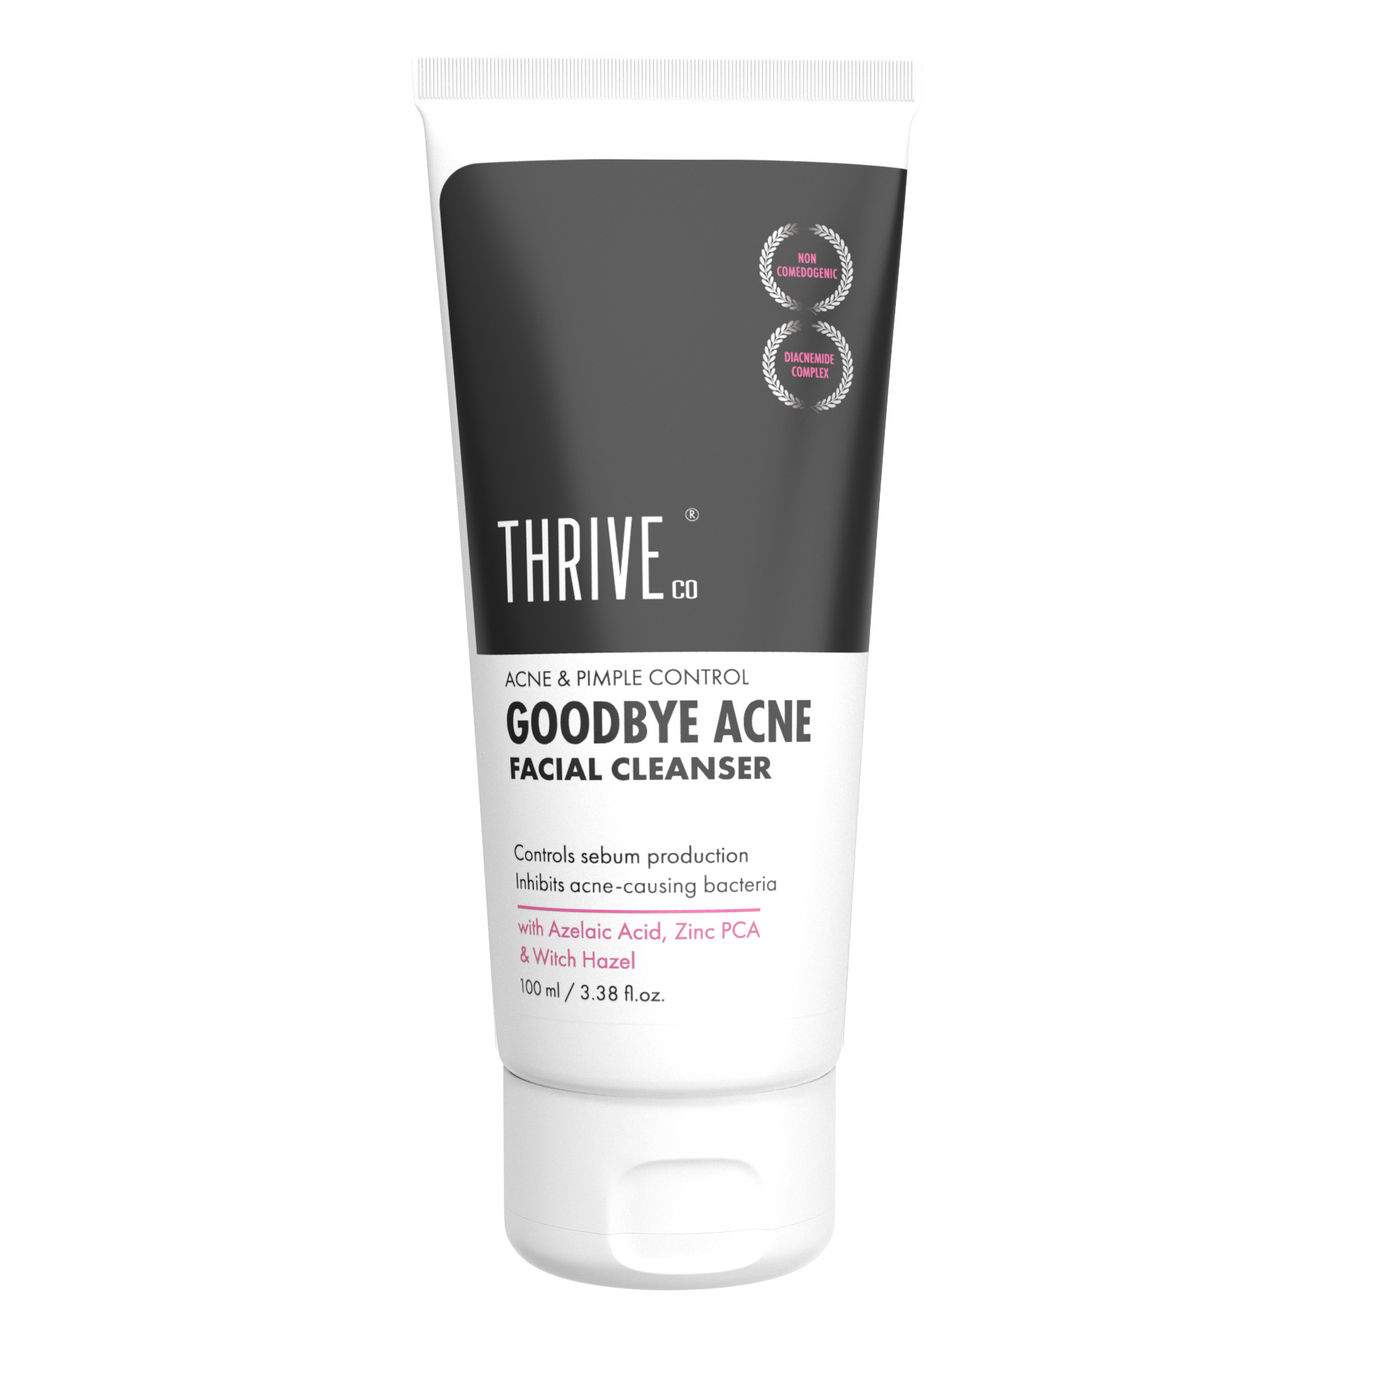 ThriveCo Goodbye Acne Facial Cleanser | Reduces Acne-Causing Bacteria & Sebum Production | Non-Comedogenic Anti Acne Face Wash for Pimples with DiacnemideTM, Azelaic Acid, Zinc PCA & Witch Hazel | For Women & Men | 100ml